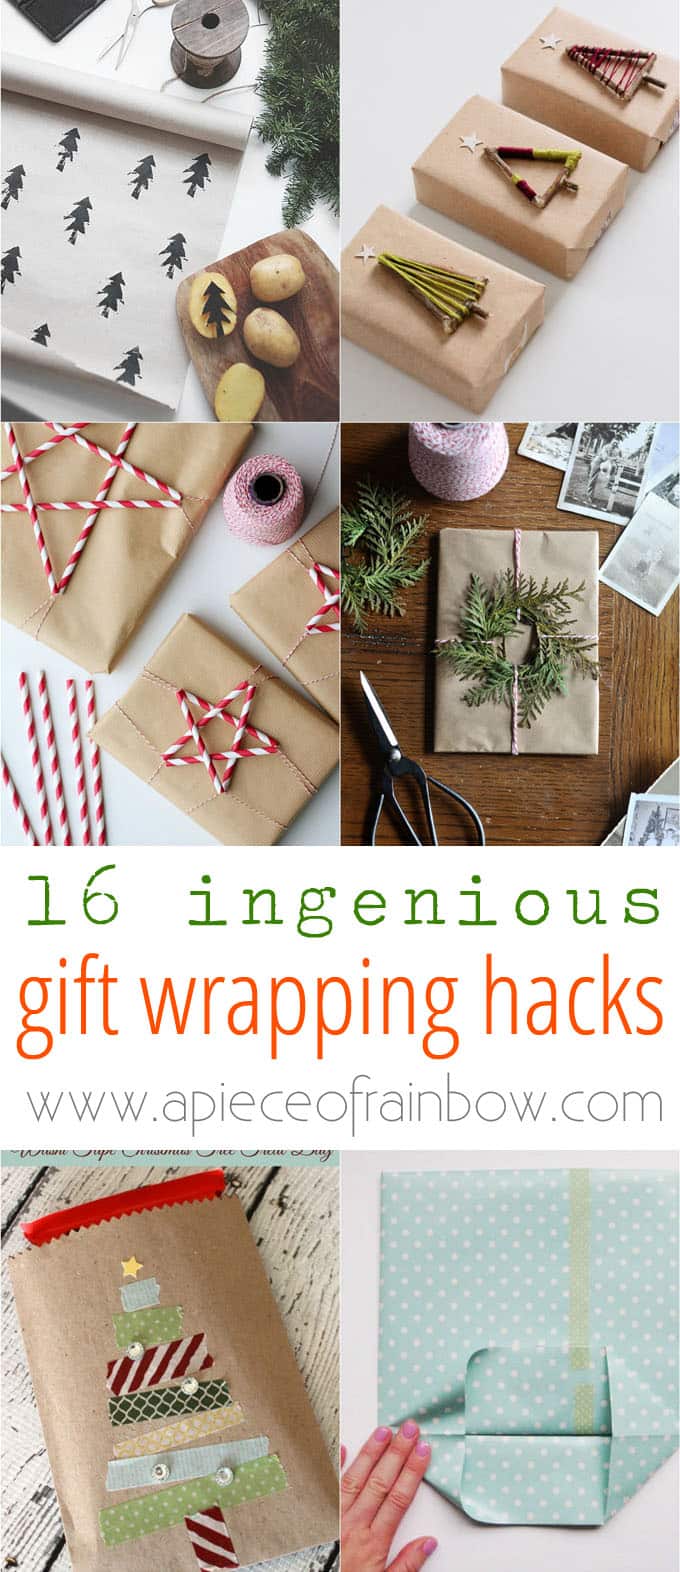 Present Wrapping Tips + 3 Easy Gift Wrap Ideas